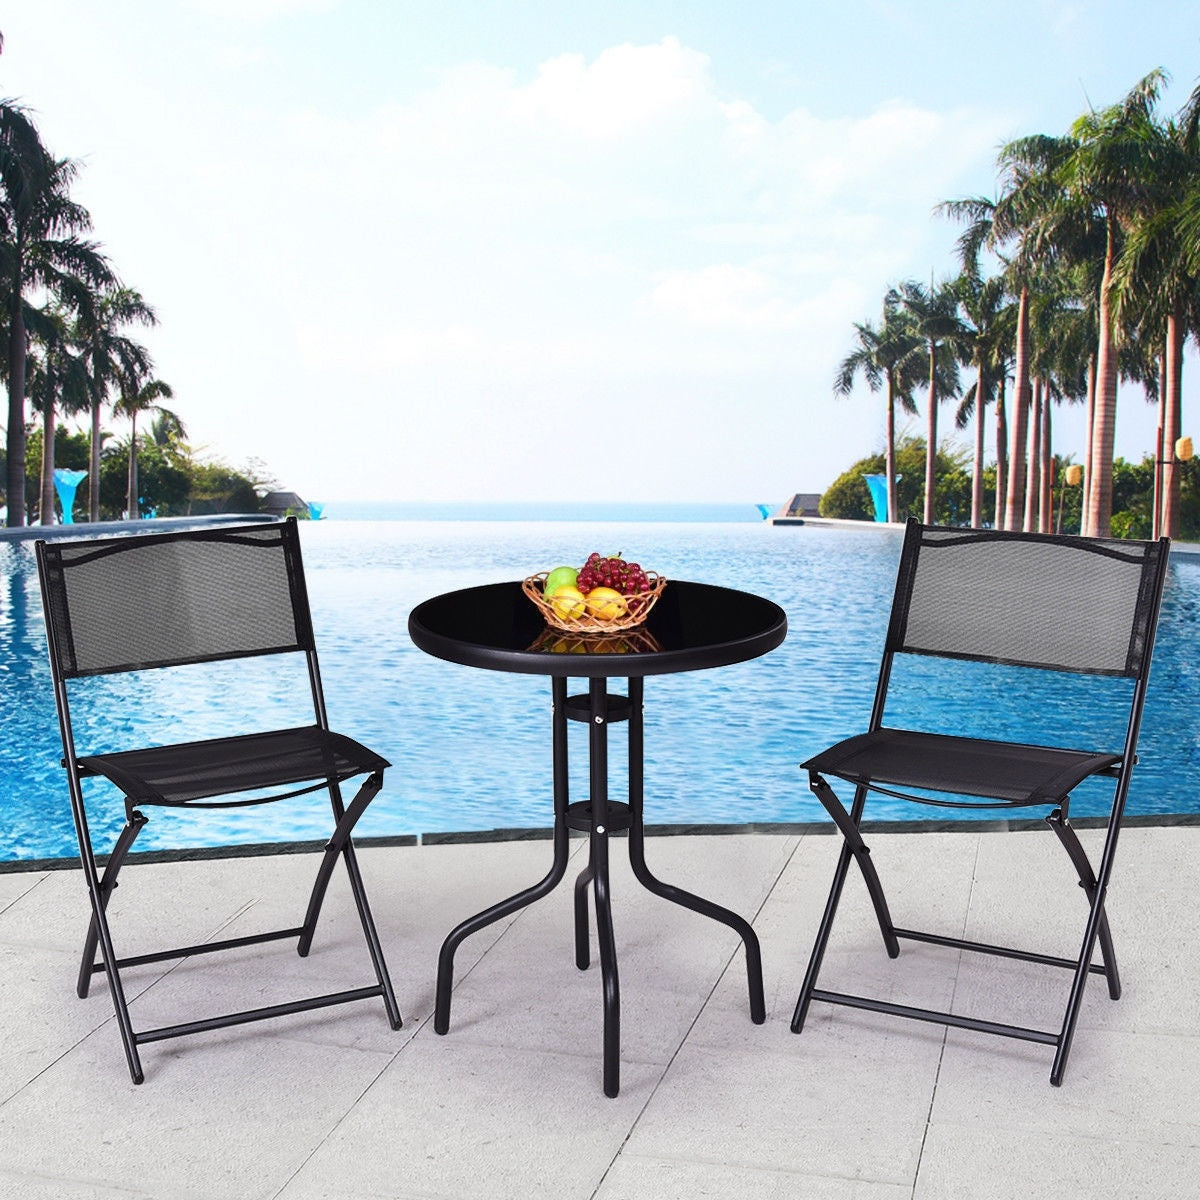 3 Pieces Folding Bistro Table Chairs Set